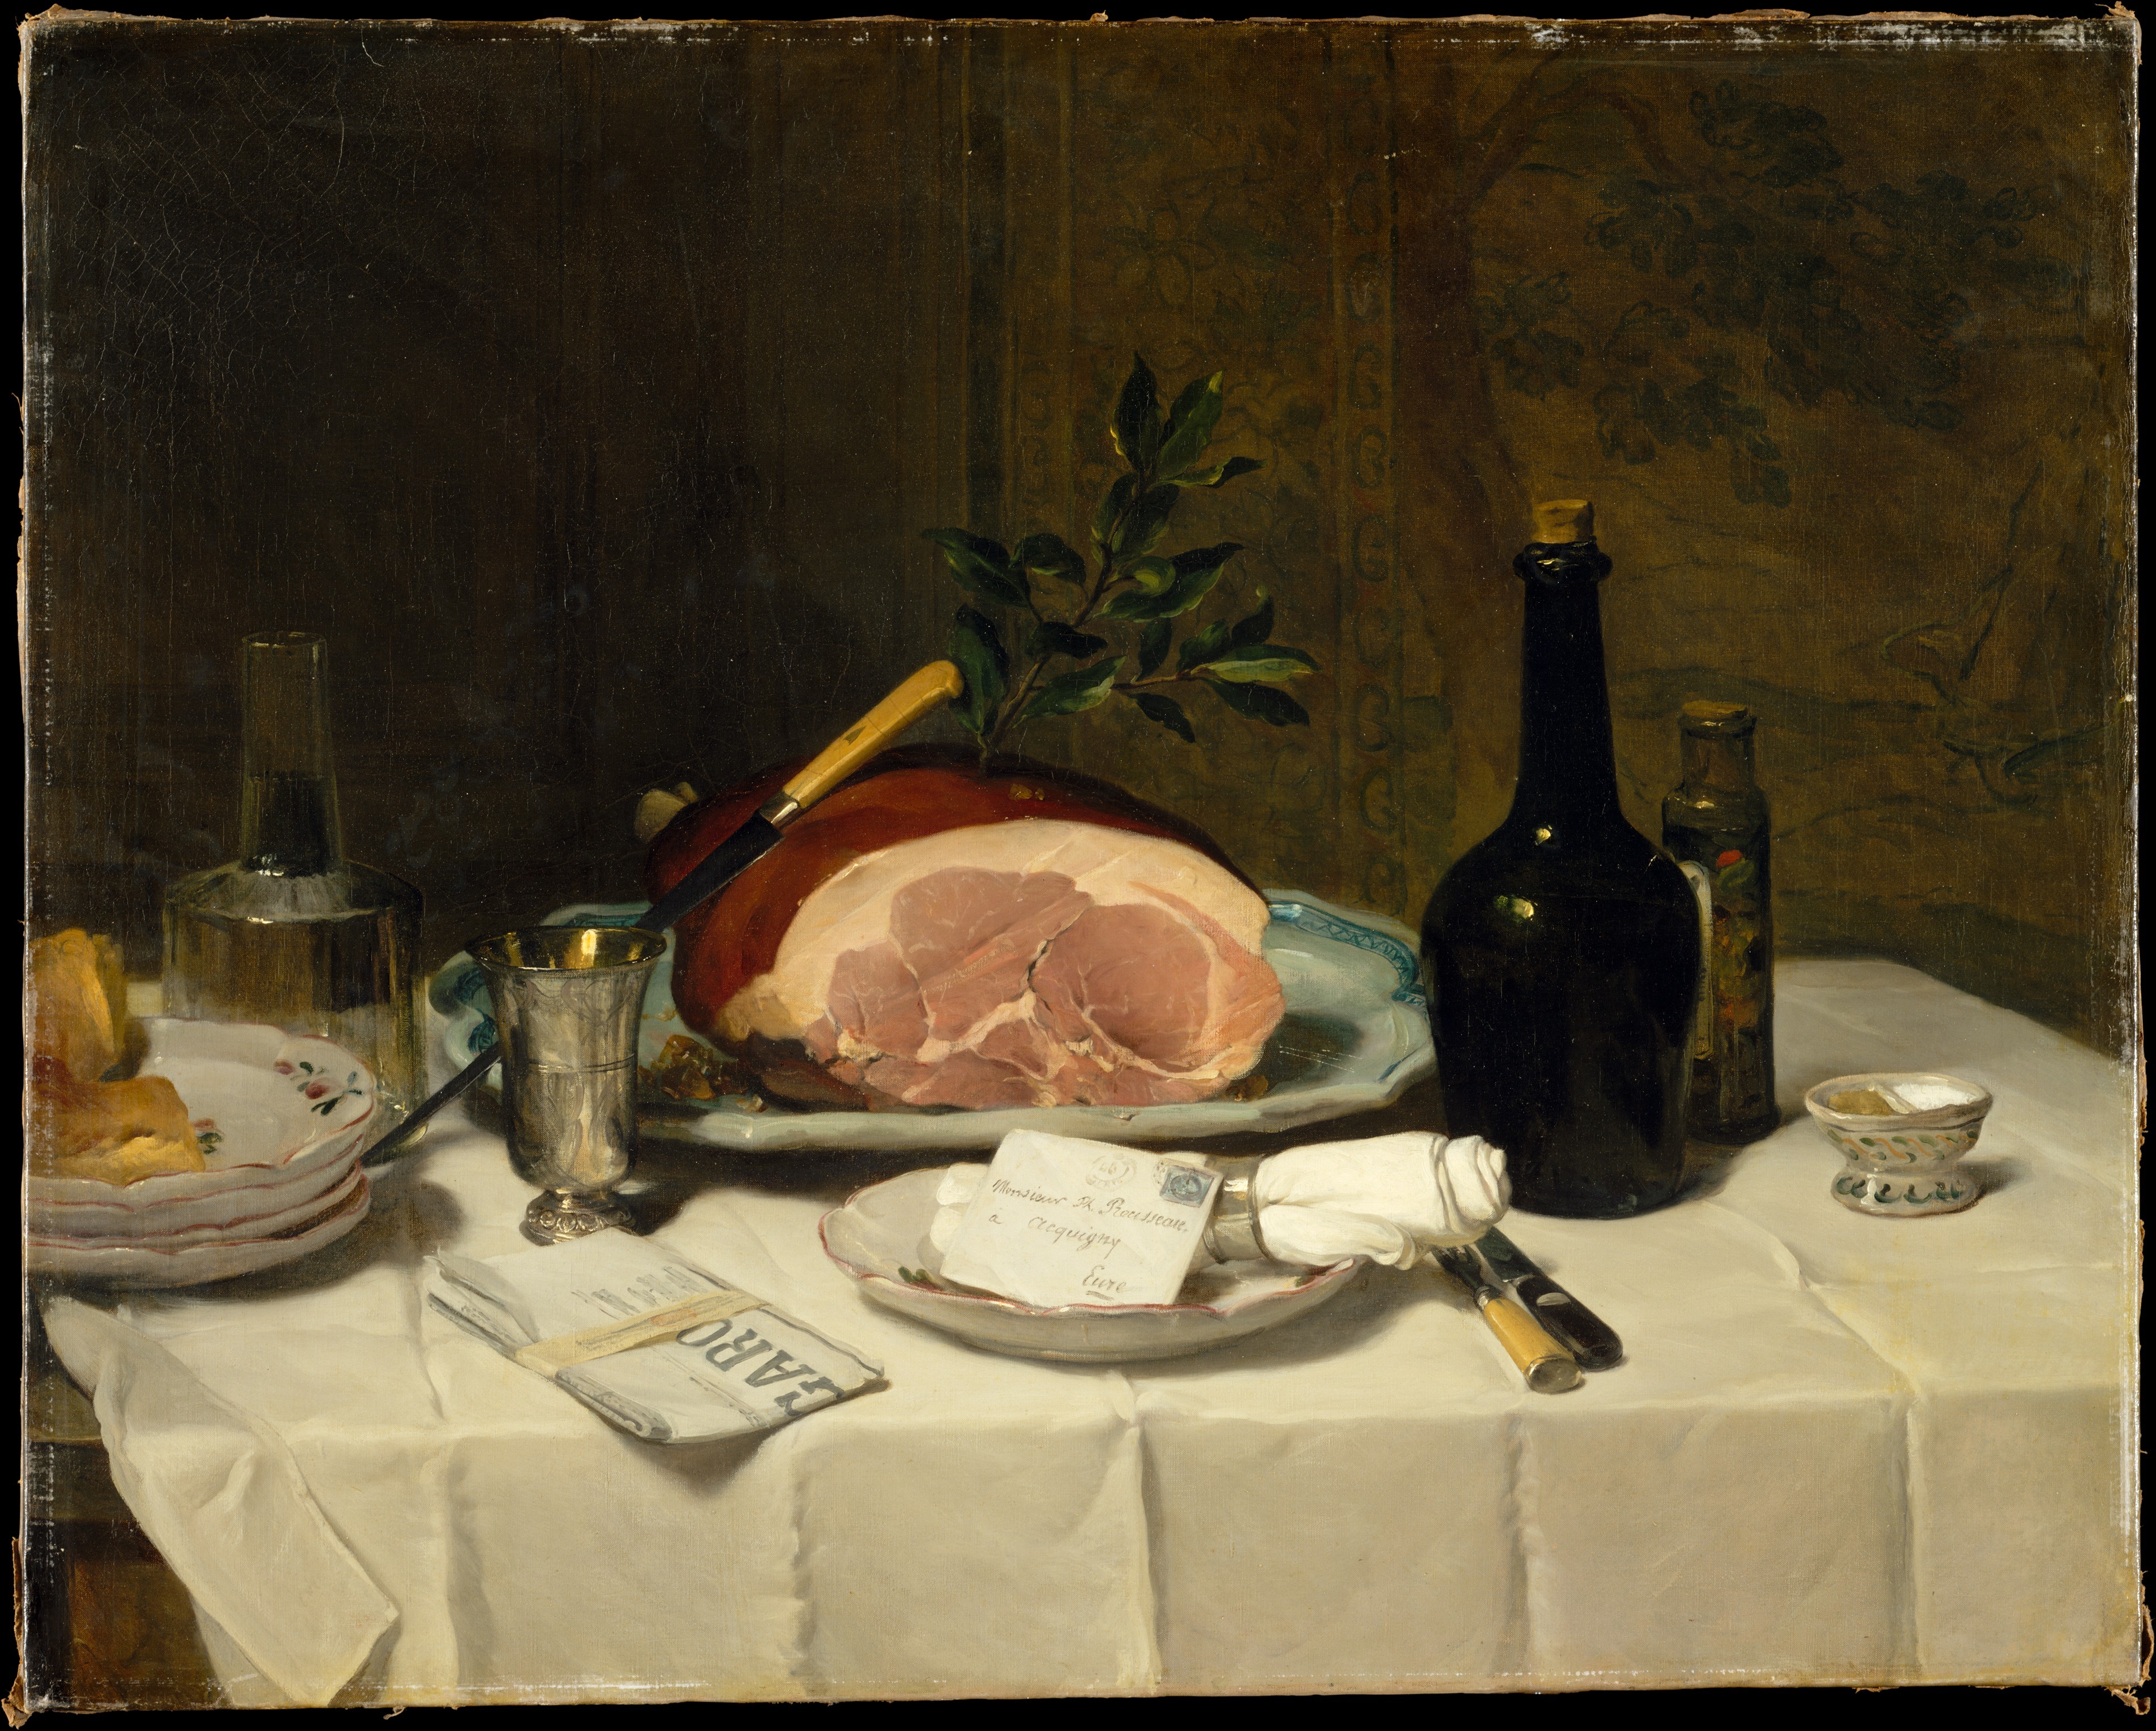 Still Life with Ham by Philippe Rousseau - 1870s - 73 x 92.1 cm Metropolitan Museum of Art